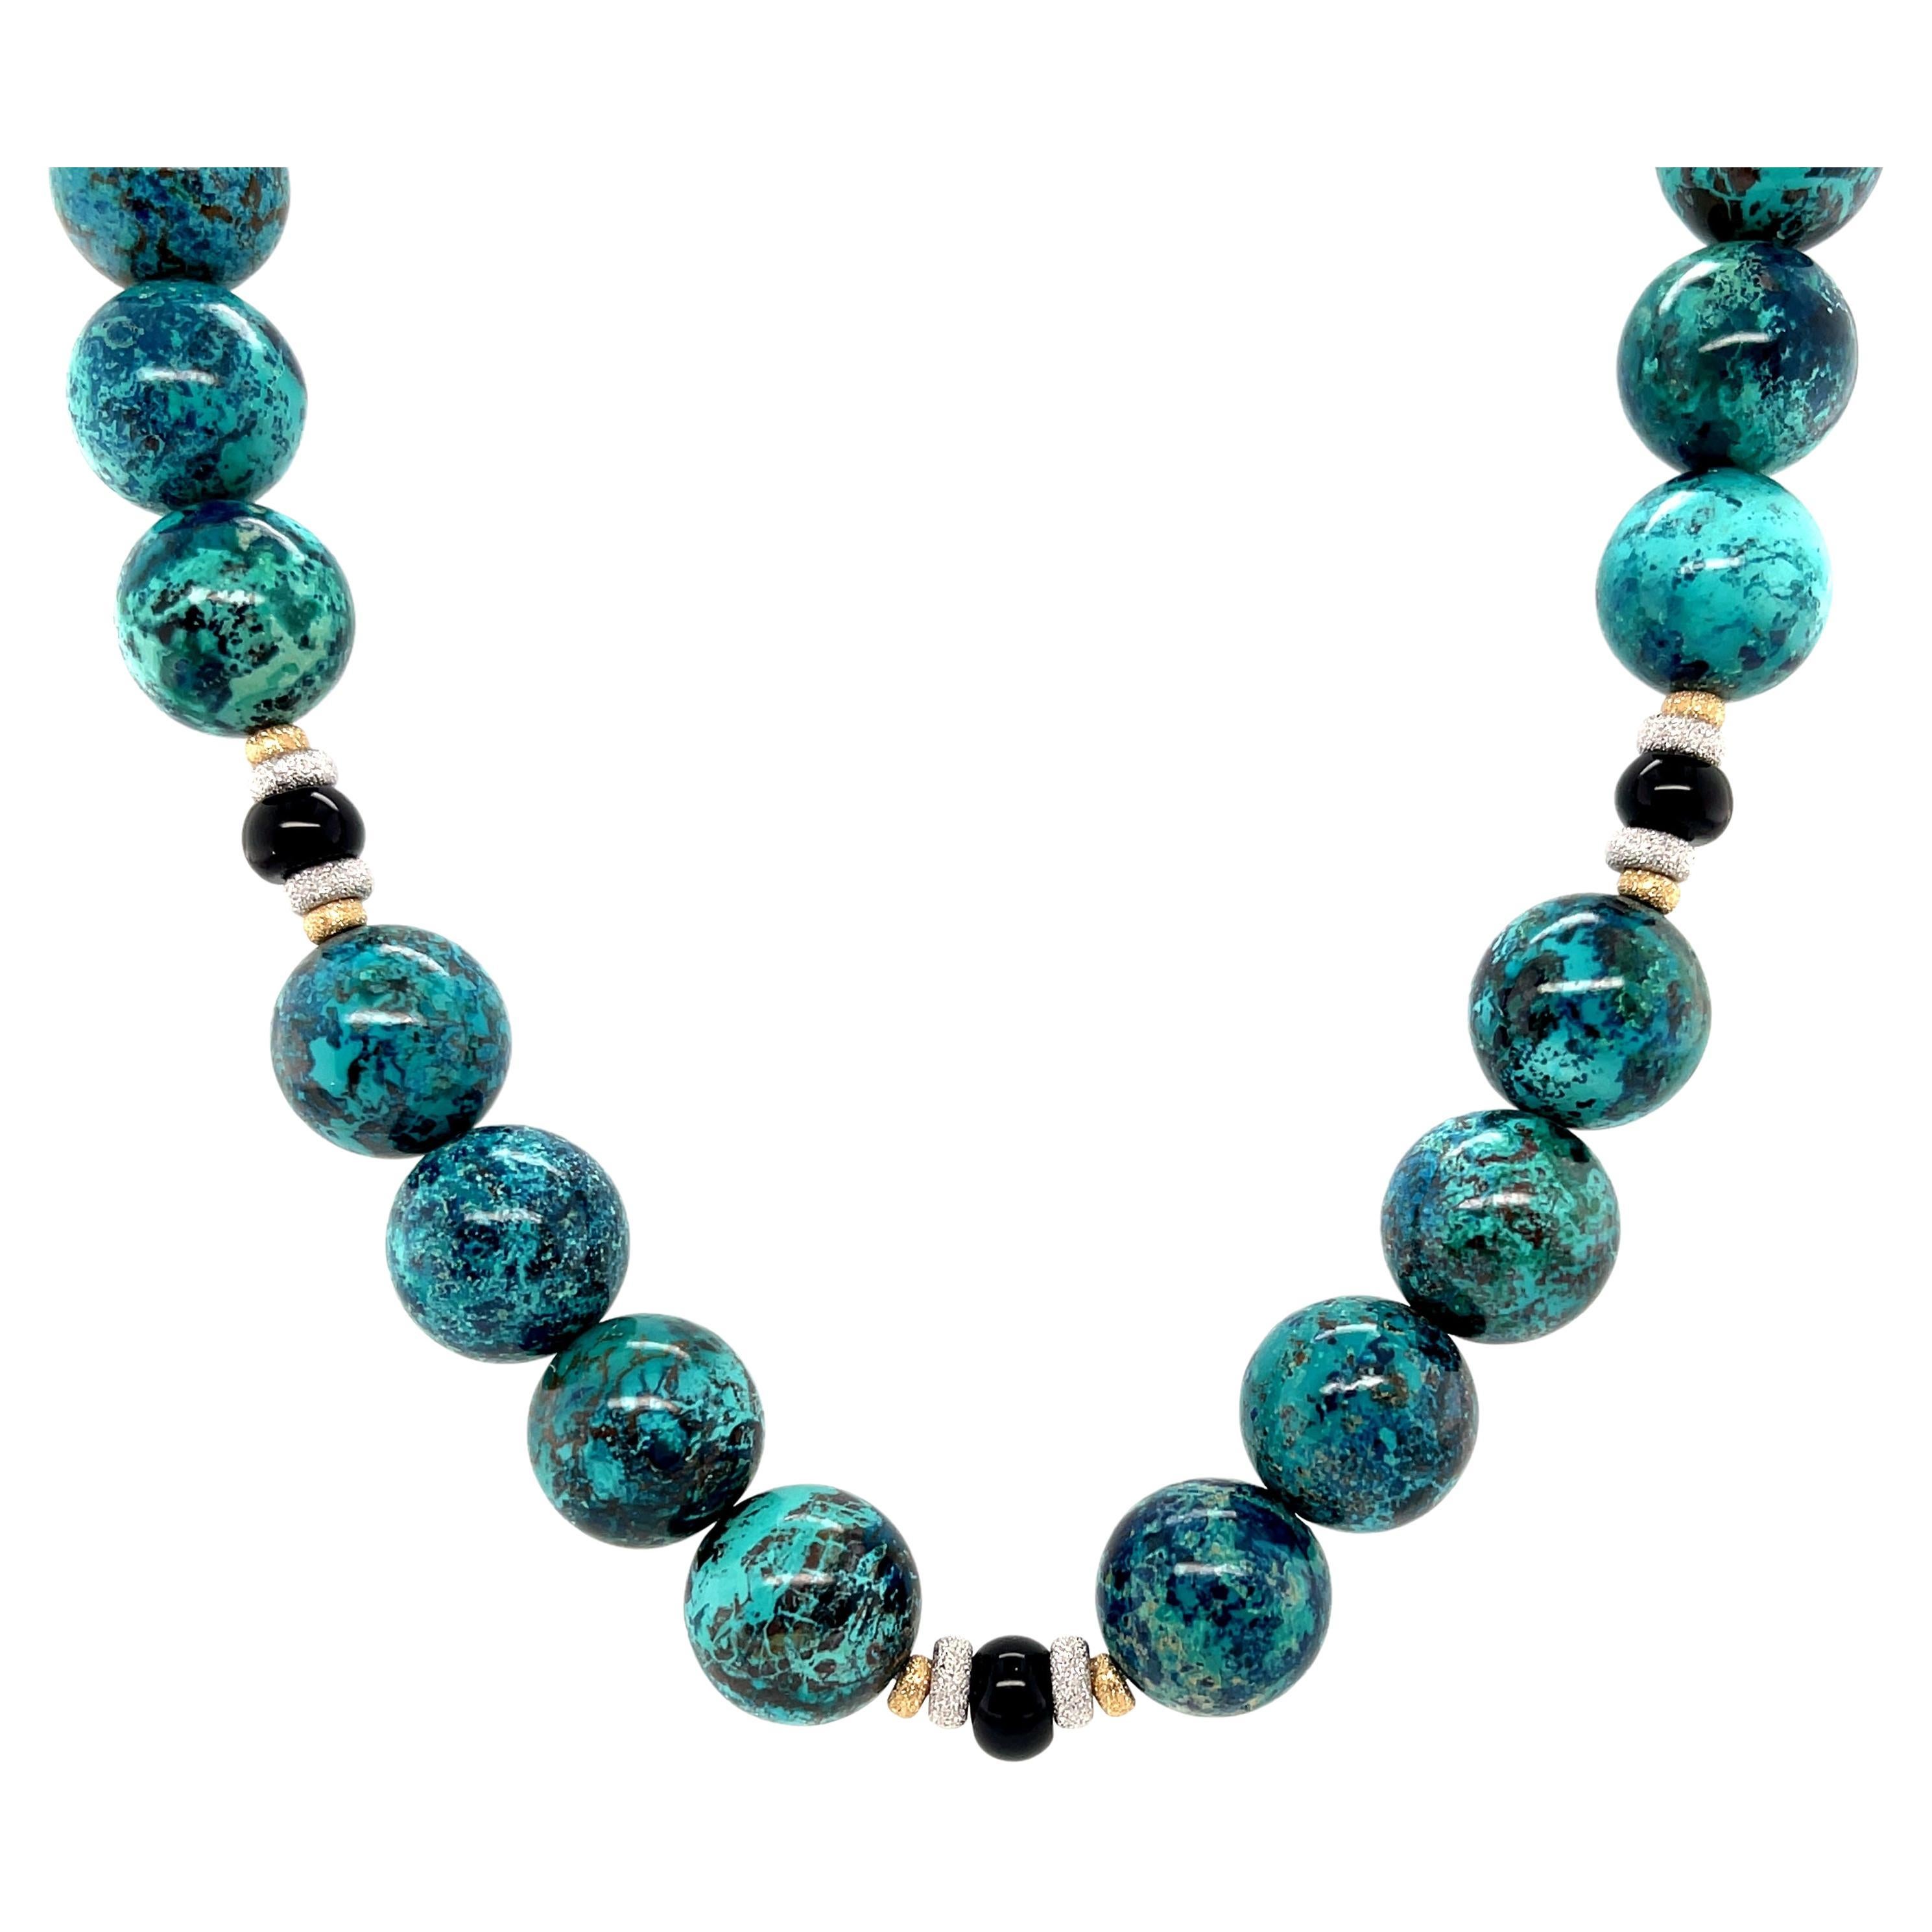 Chrysocolla and Onyx Beaded Necklace with 18k Yellow and White Gold Accents  